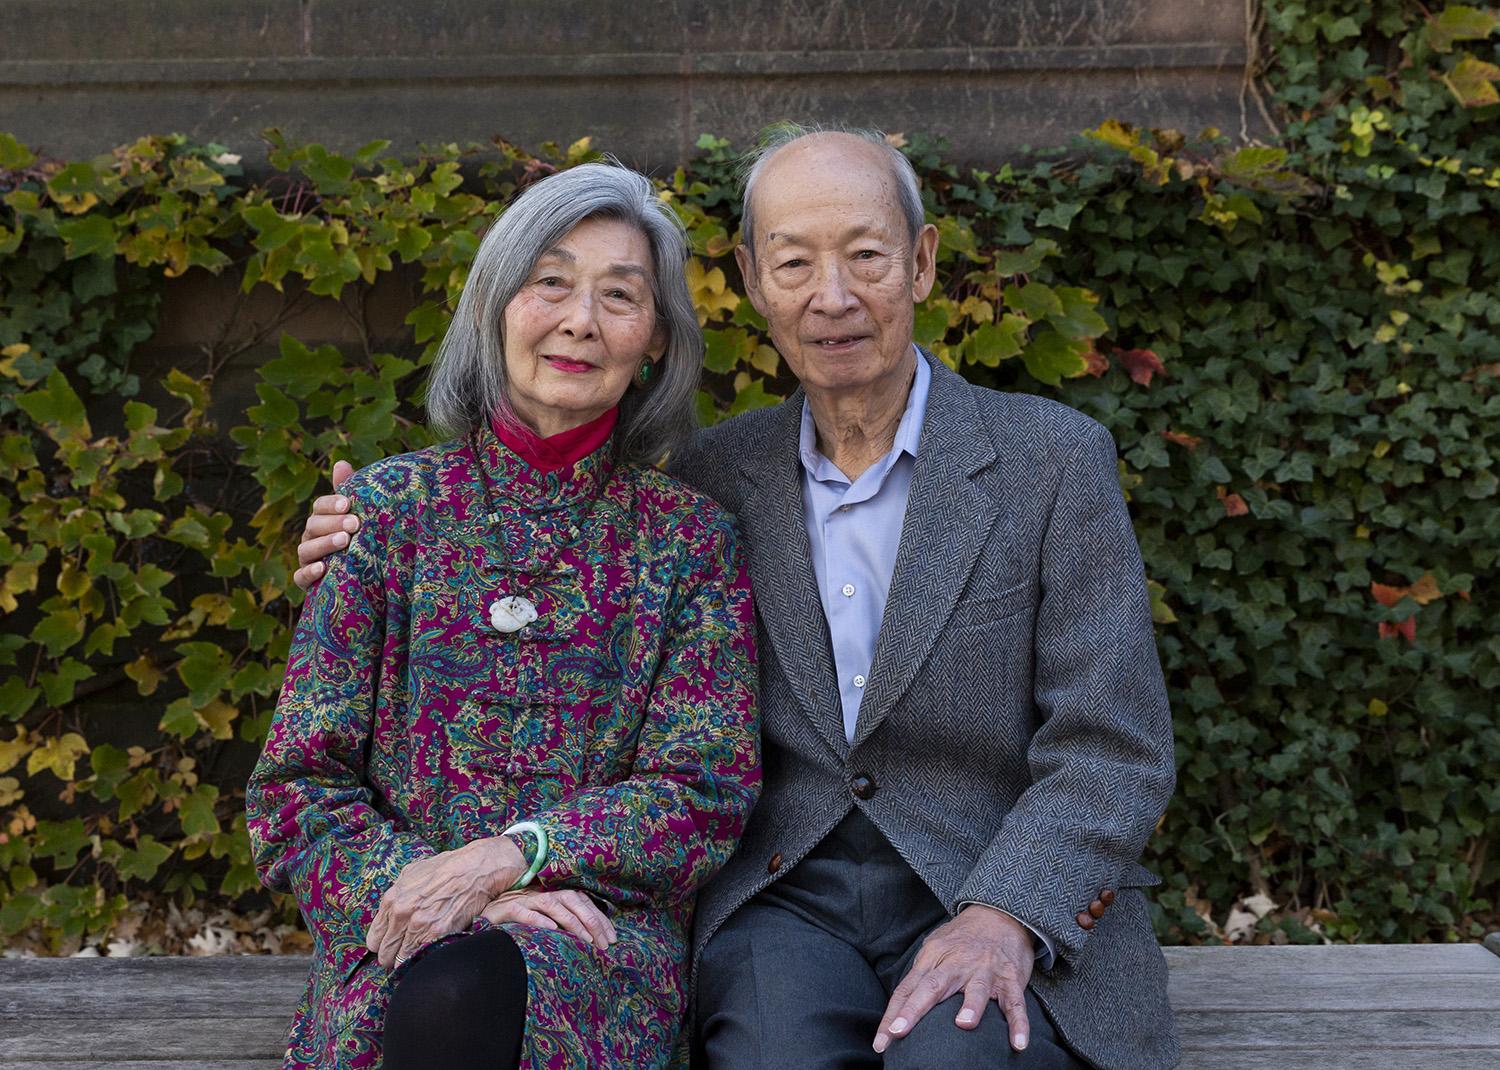 Paula and Gregory Chow, the Class of 1913 Professor of Political Economy, Emeritus